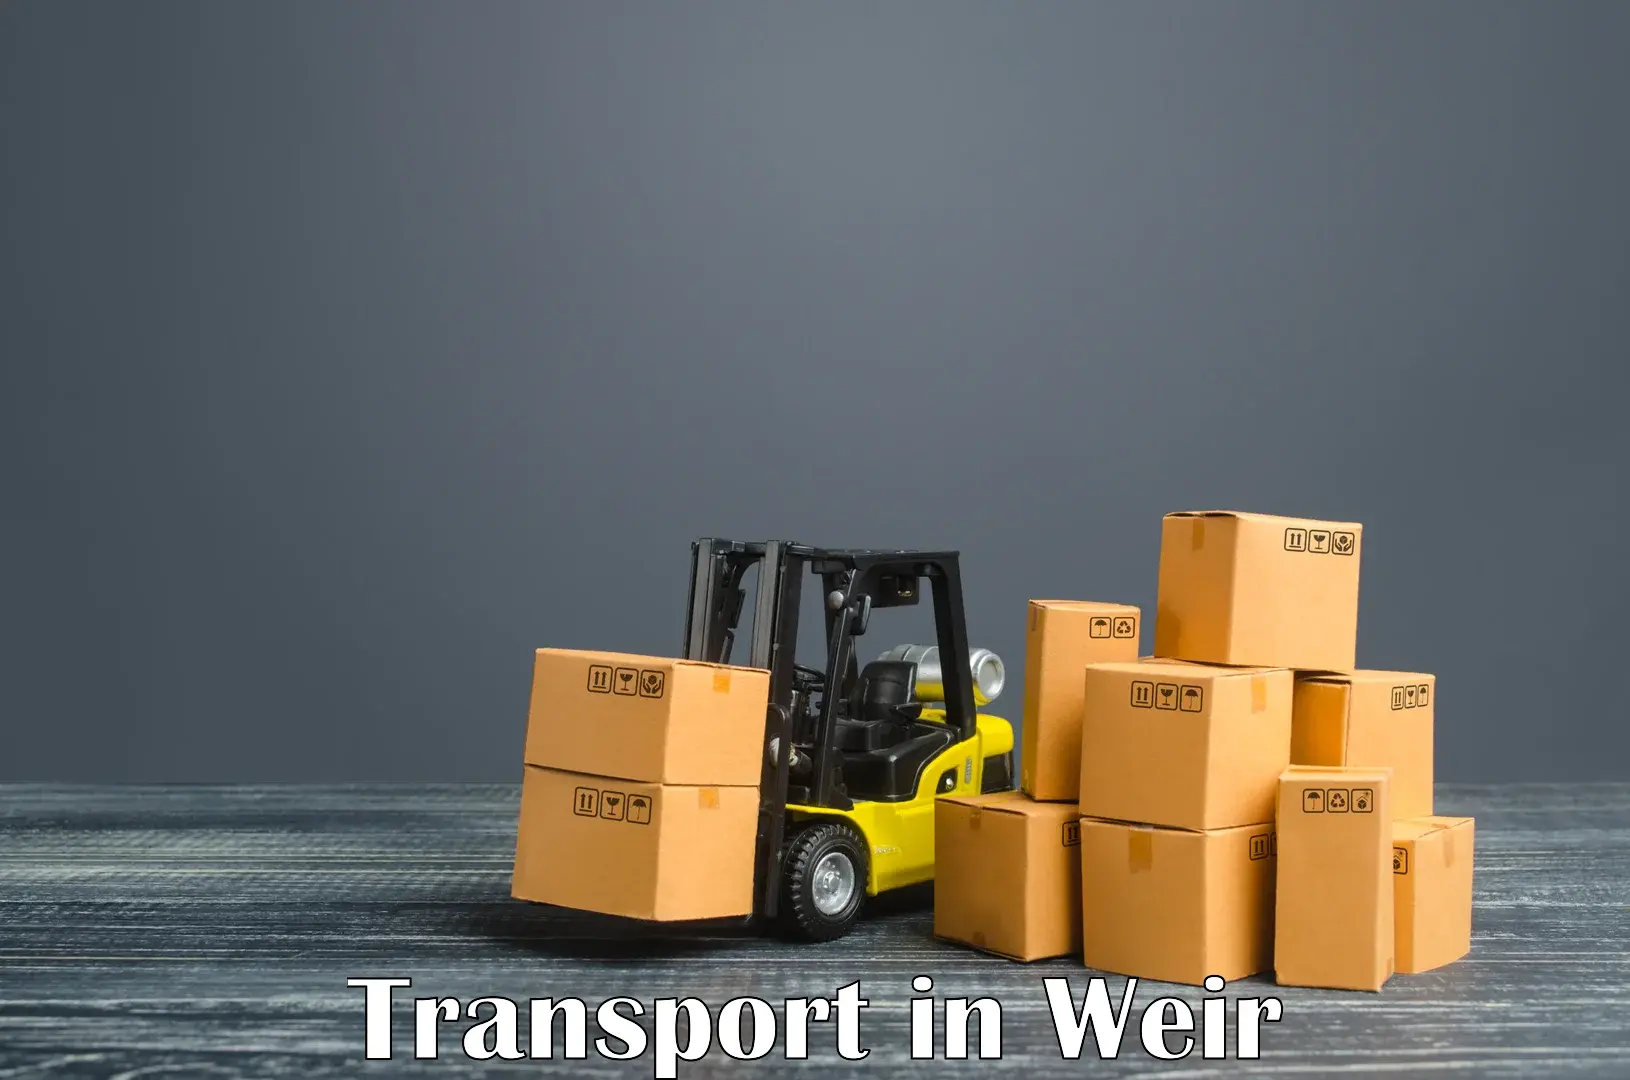 Vehicle transport services in Weir